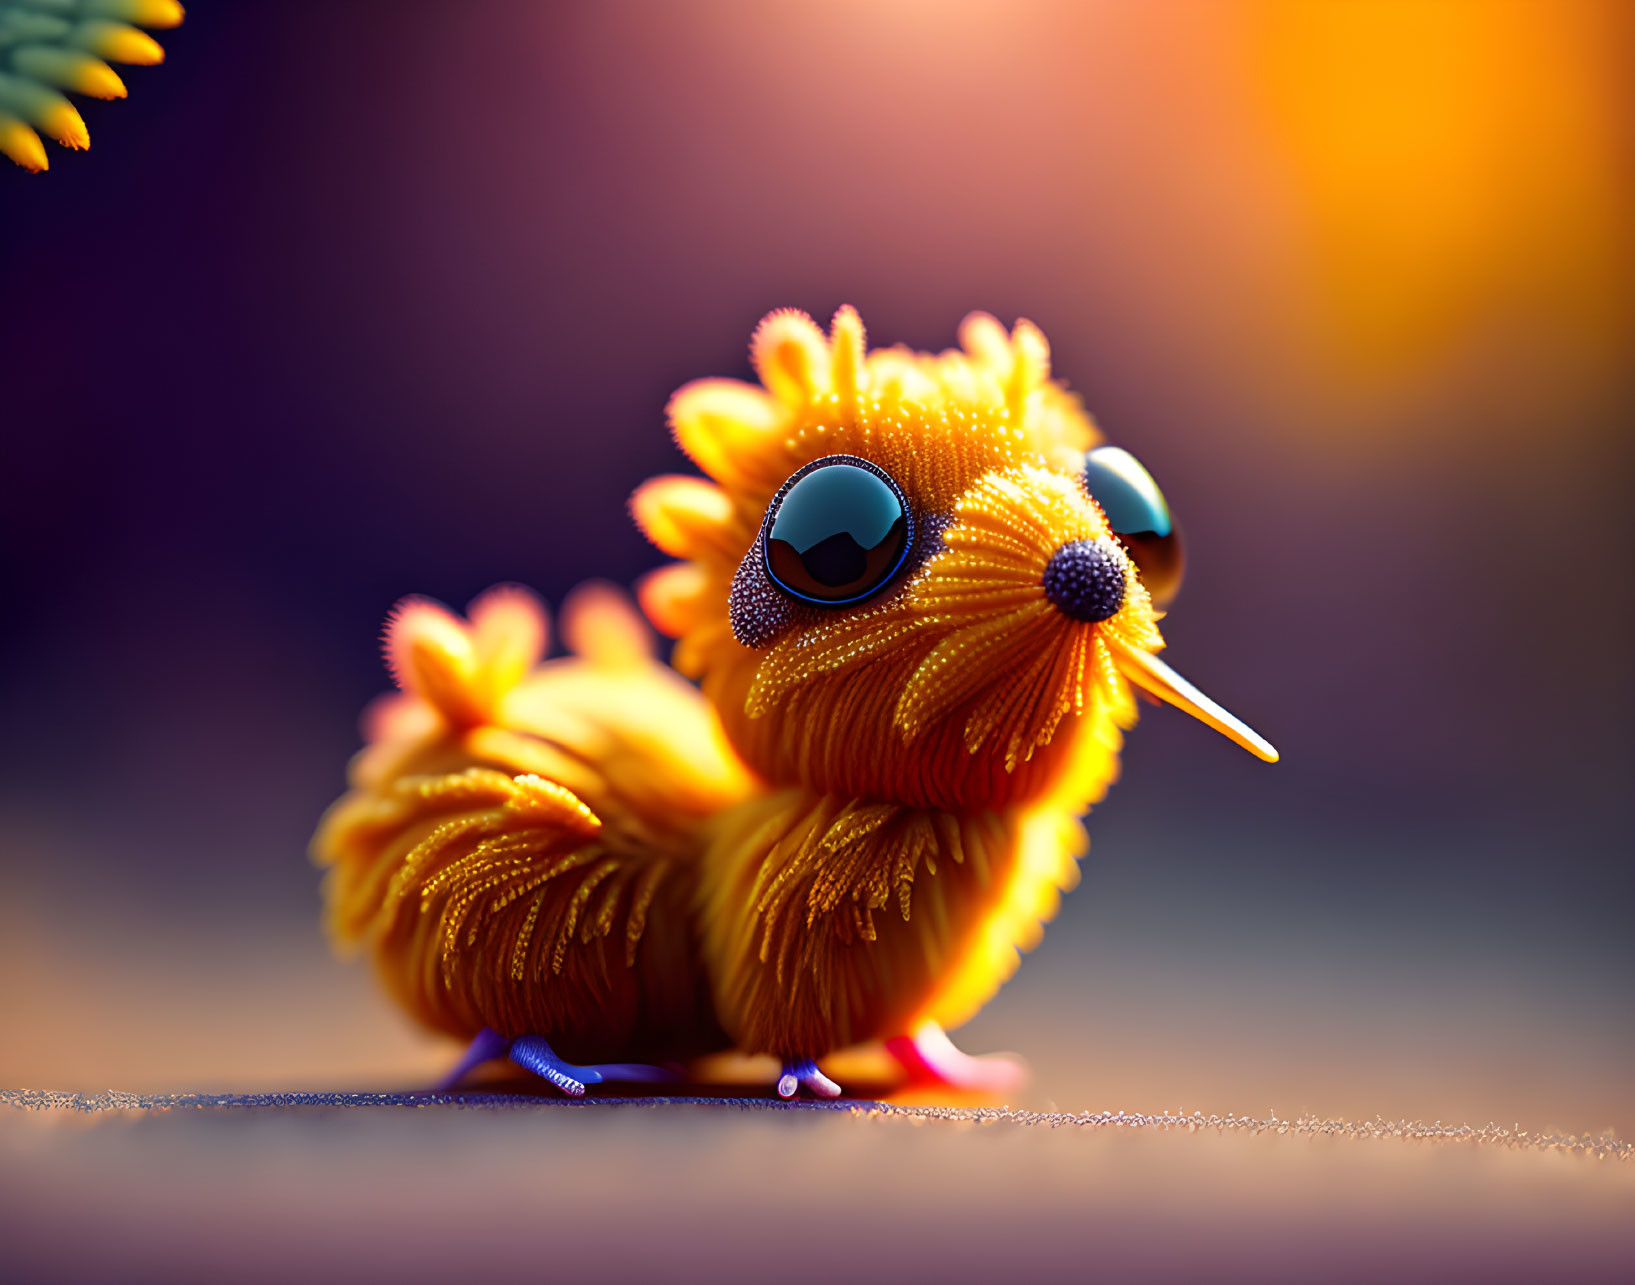 Colorful whimsical creature with orange plumage and purple feet on vibrant background